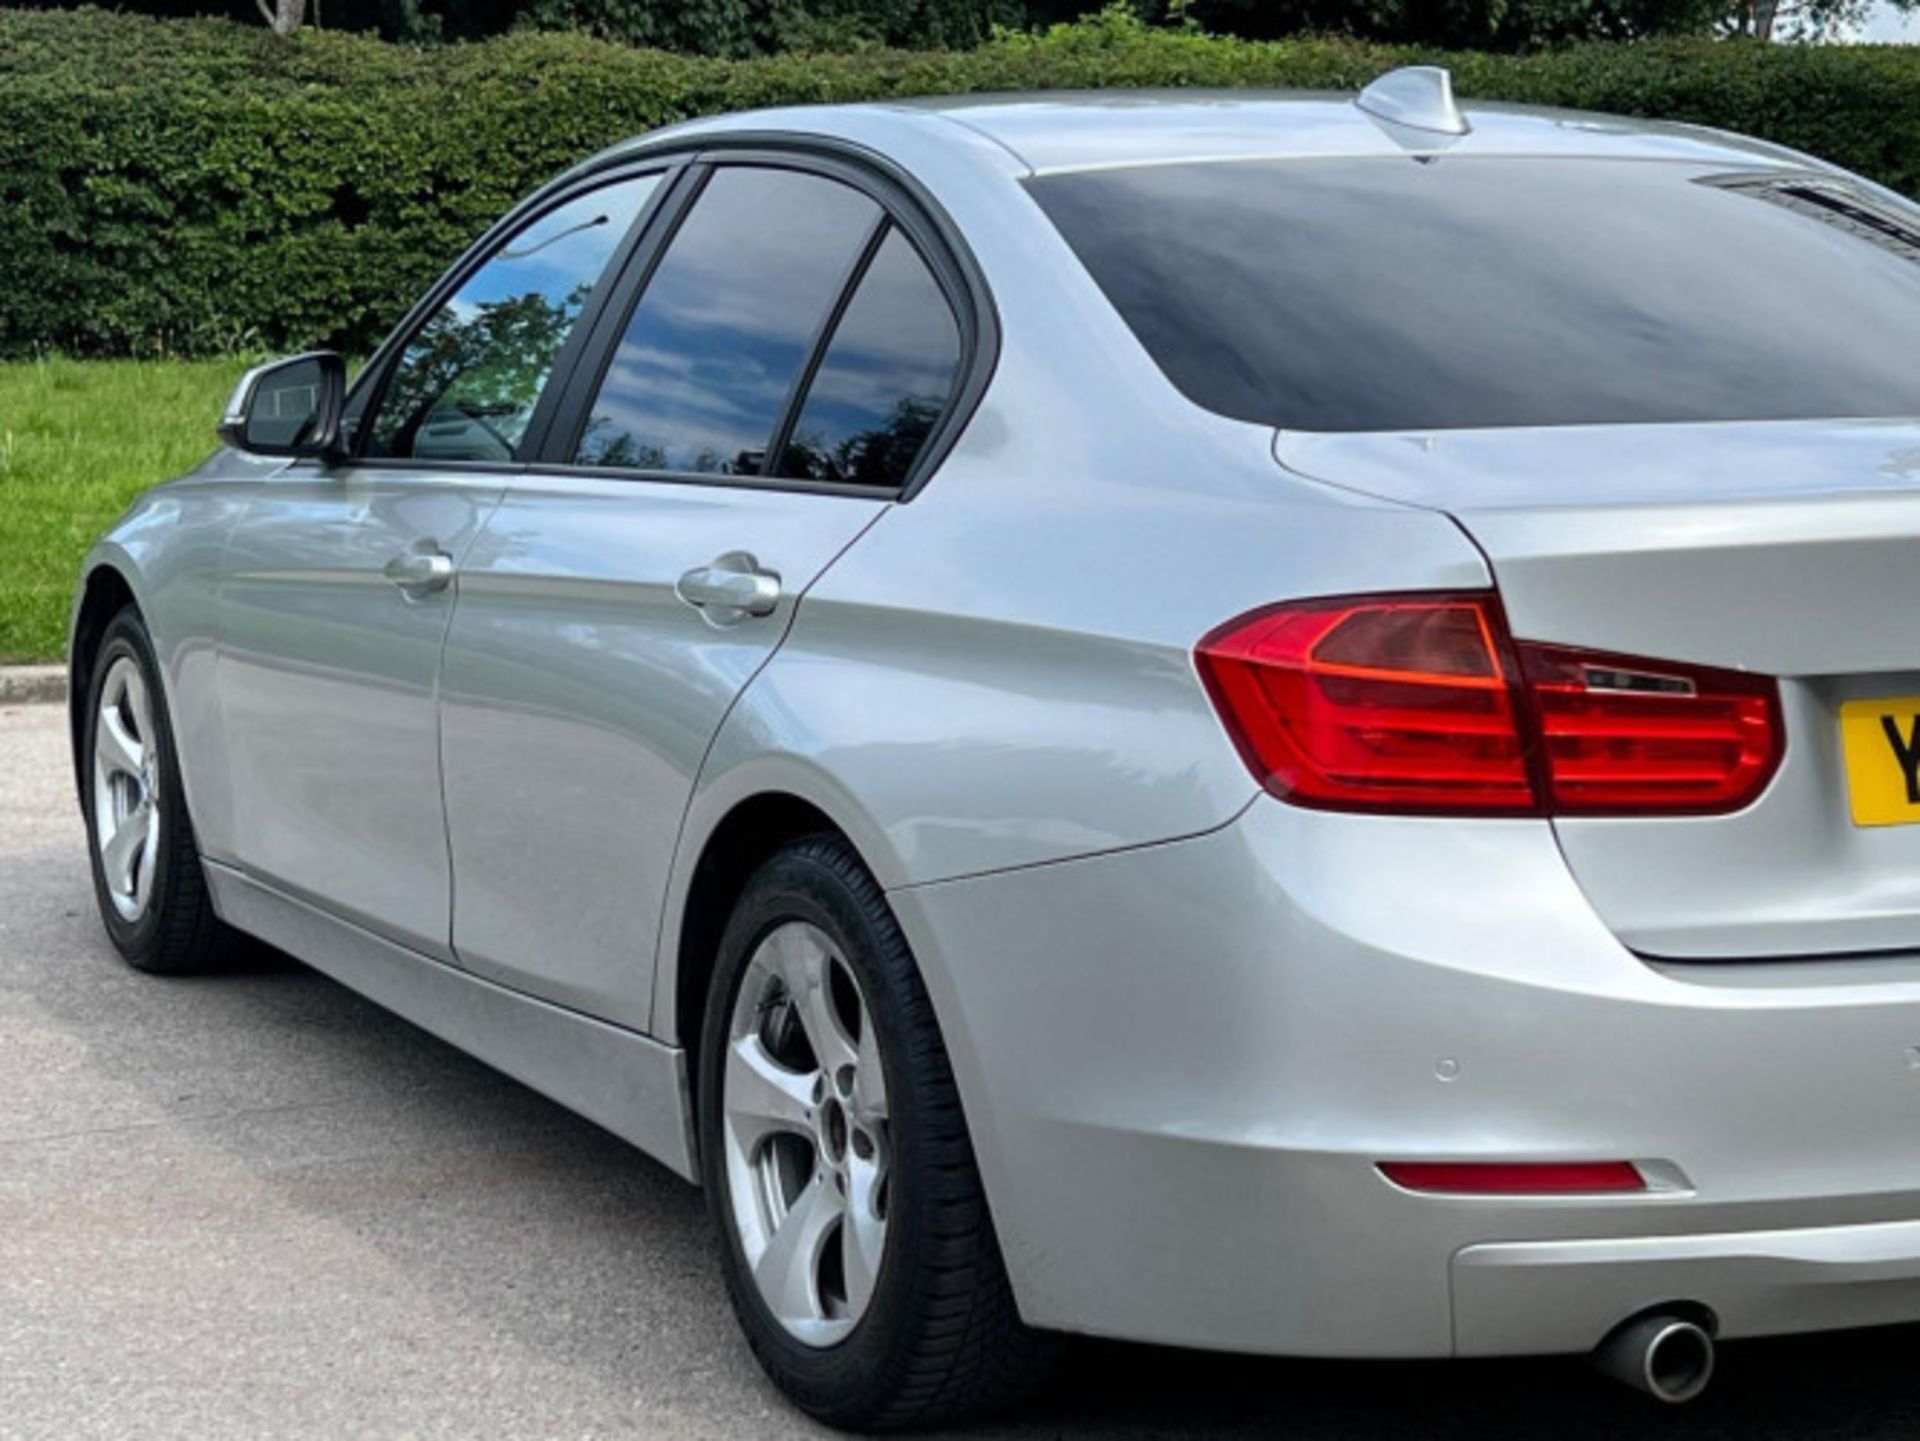 BMW 3 SERIES 2.0 DIESEL ED START STOP - A WELL-MAINTAINED GEM >>--NO VAT ON HAMMER--<< - Image 212 of 229